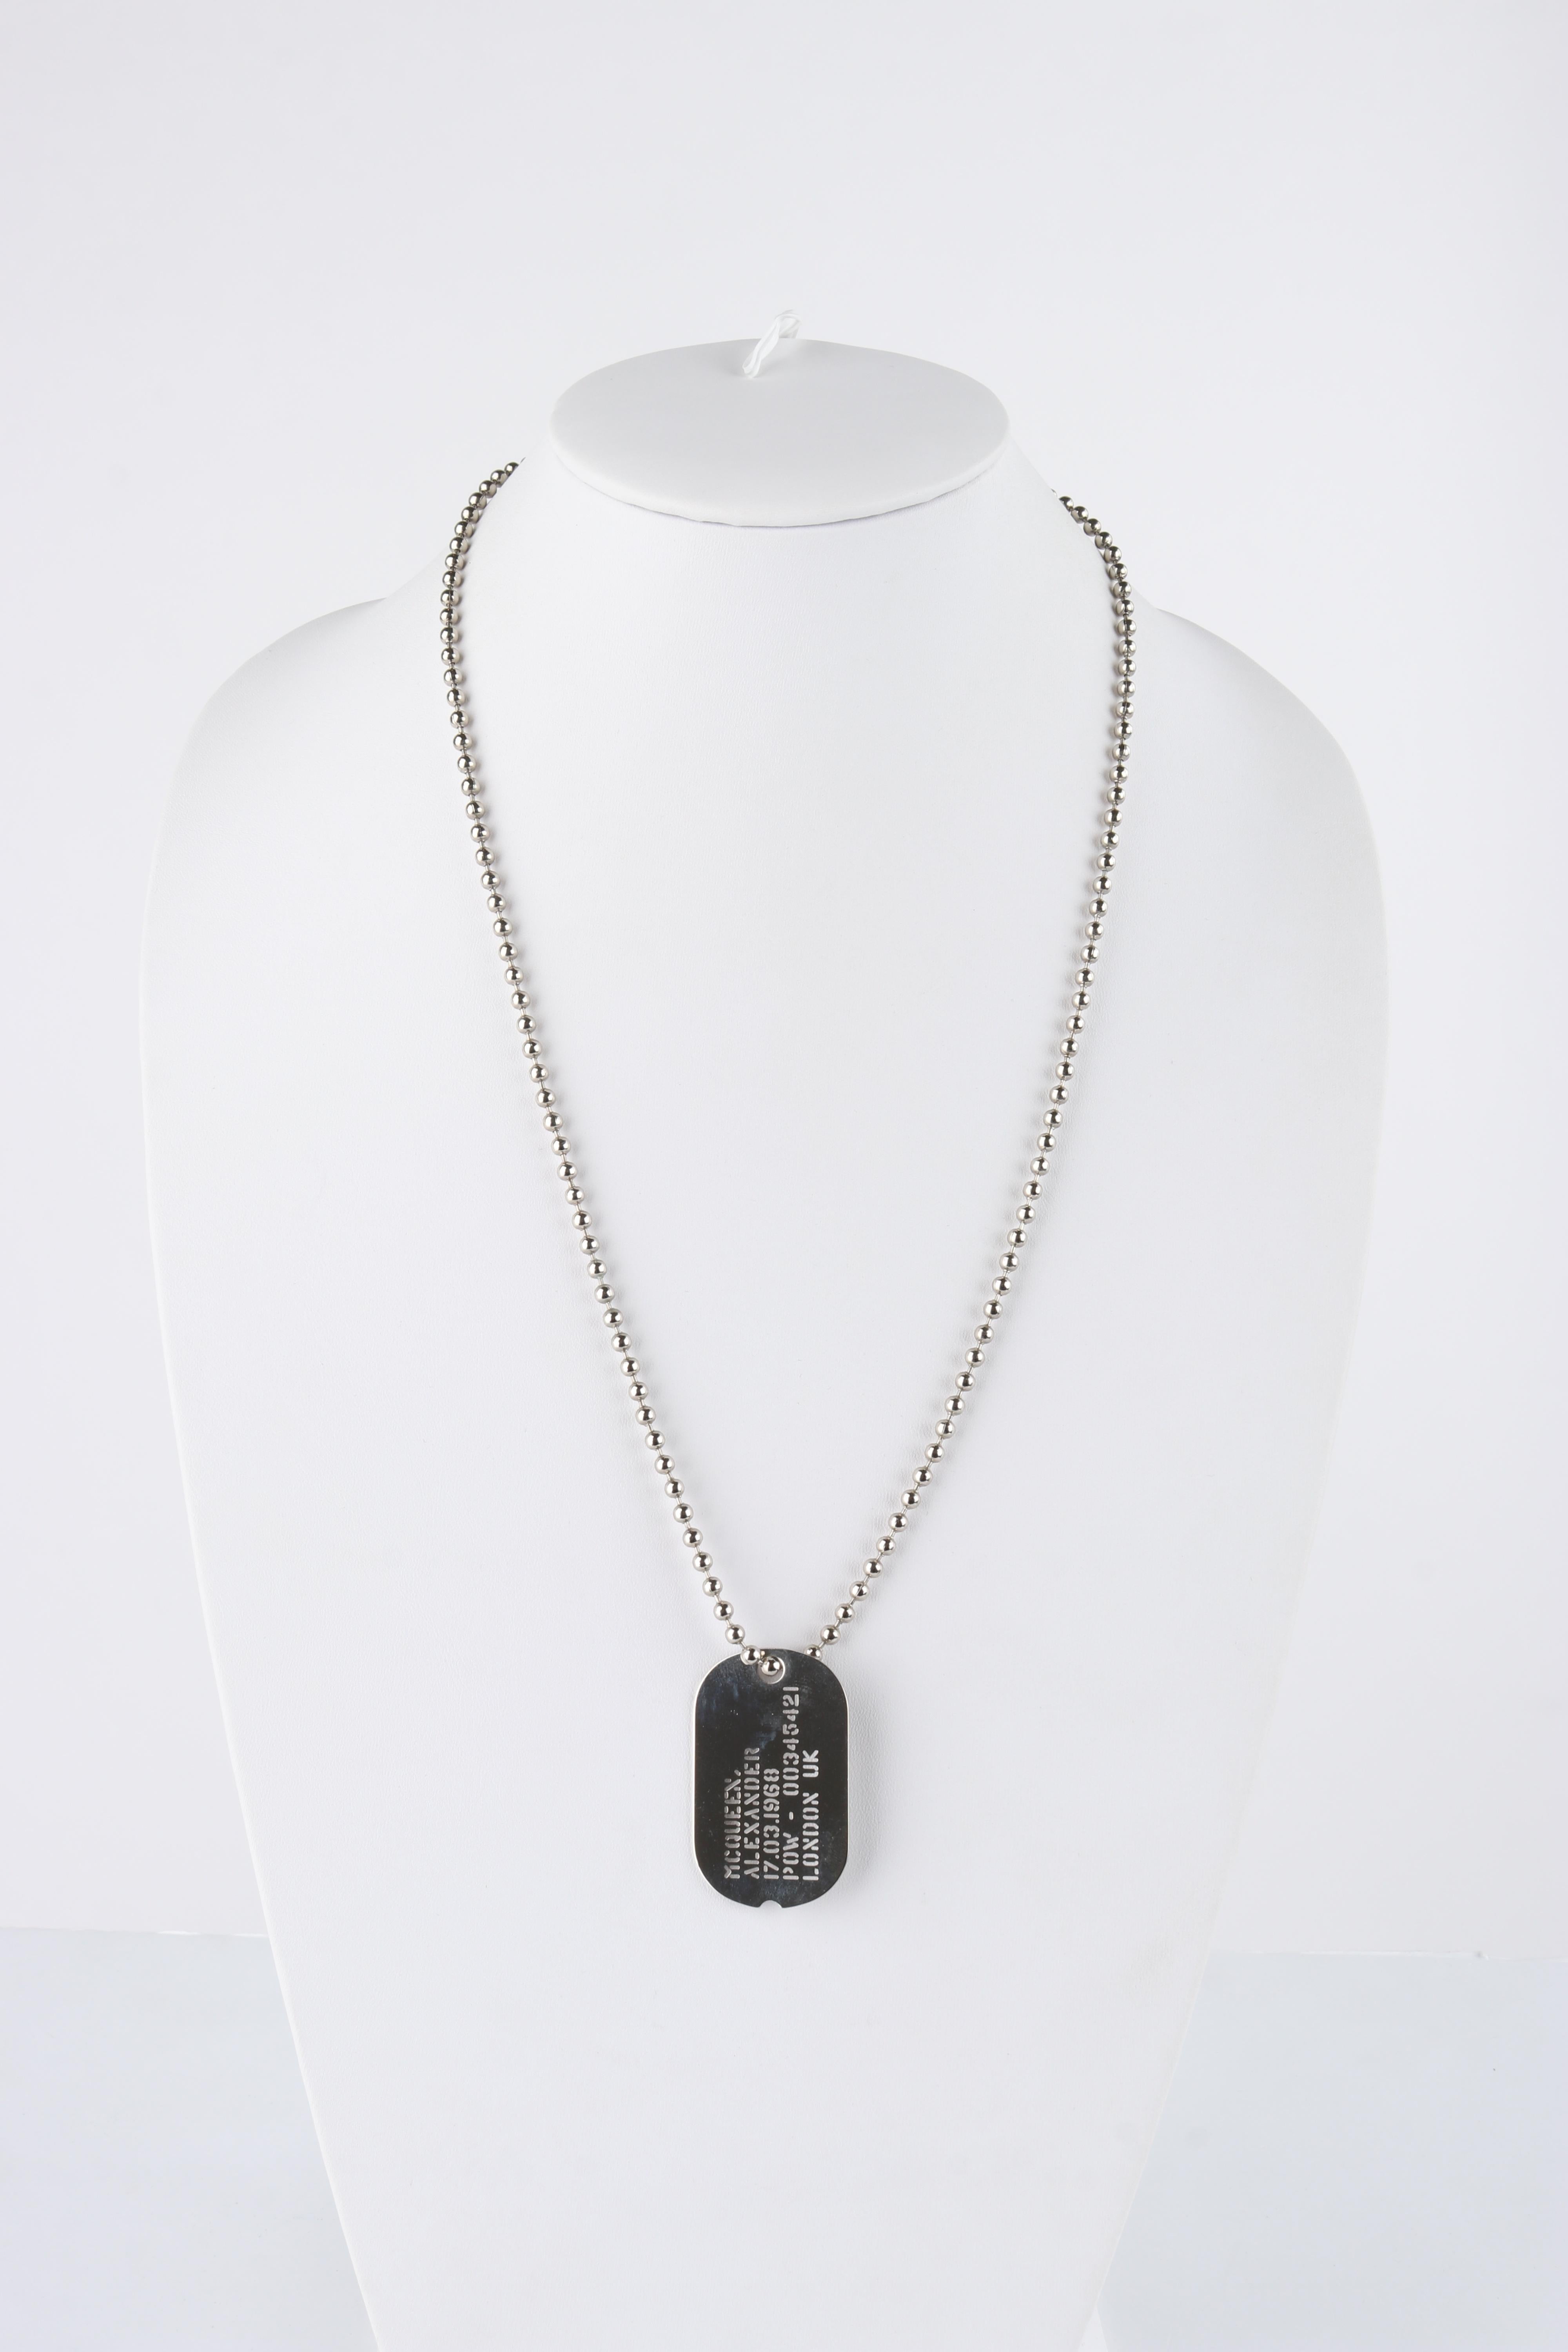 ALEXANDER McQUEEN A/W 2005 Silver Bead Chain Military Dog Tag Pendant Necklace In Good Condition For Sale In Thiensville, WI